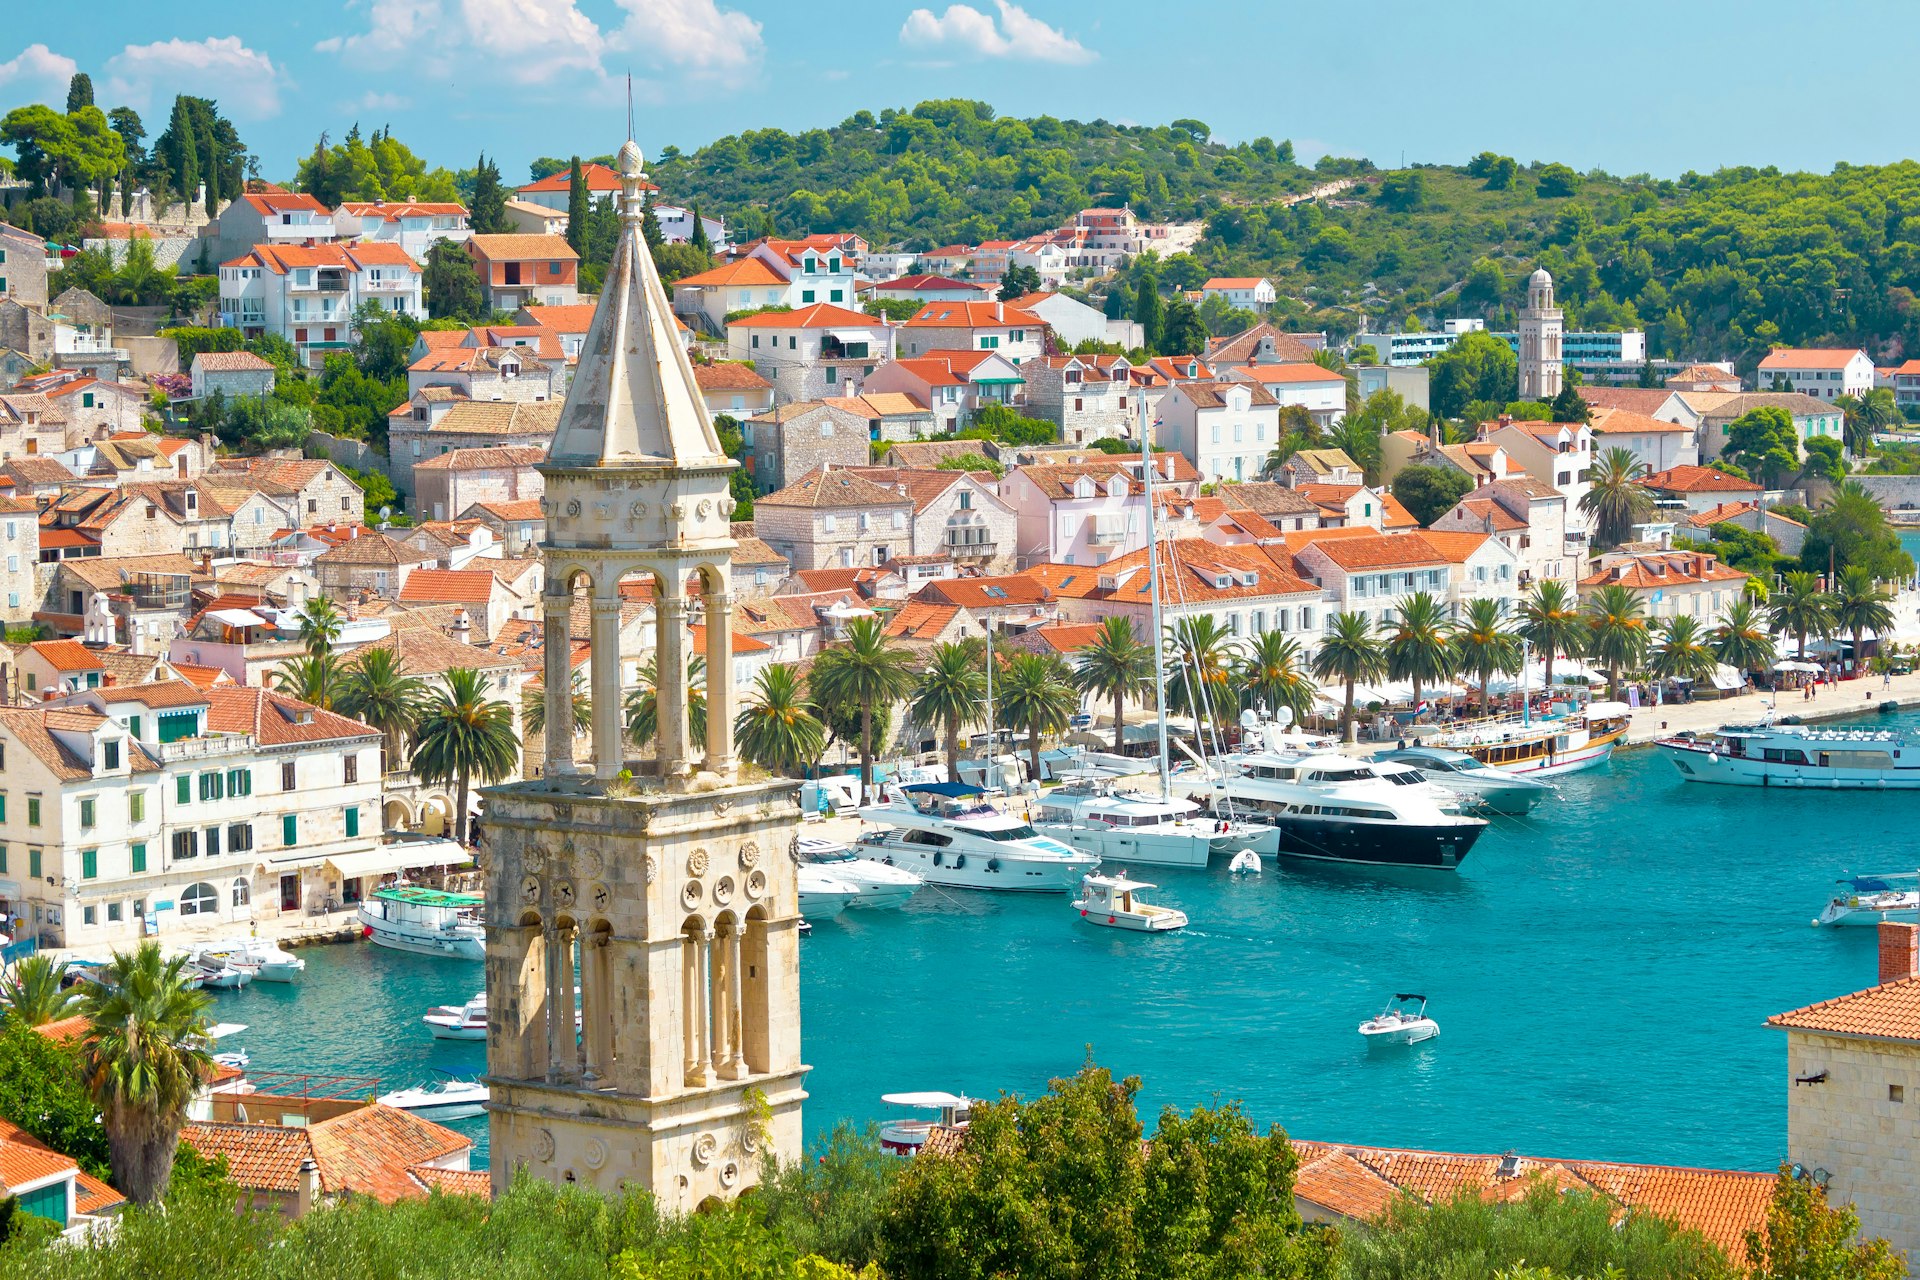 Aerial view of the harbor in Hvar Town, Croatia